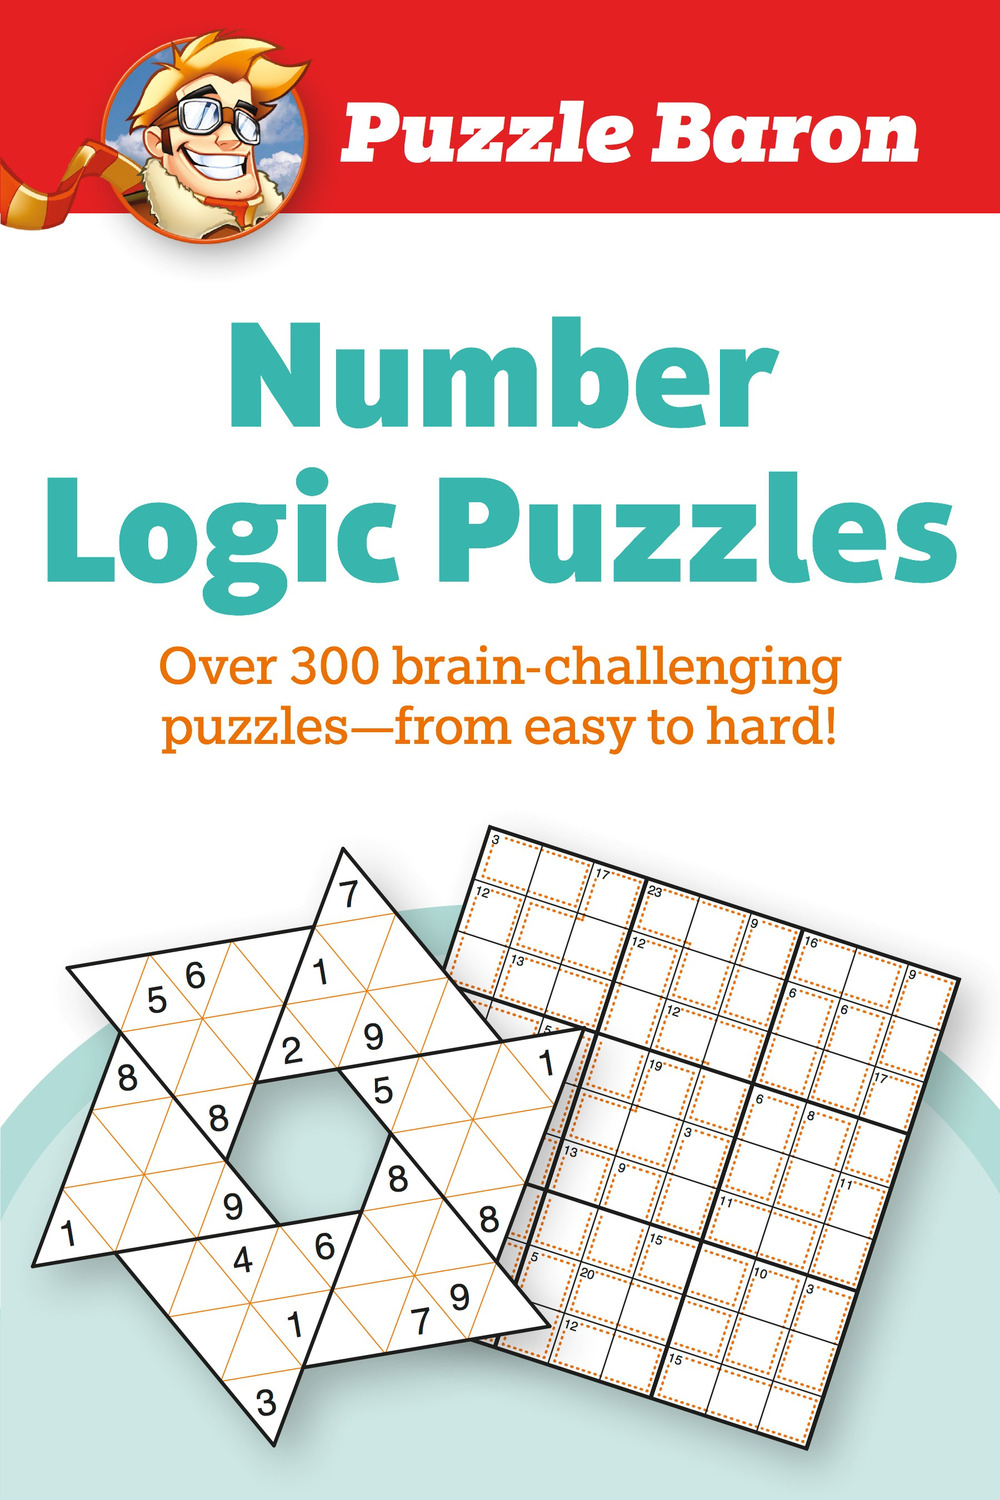 Puzzle Baron's Number Logic Puzzles Over 300 BrainChallenging Puzzles